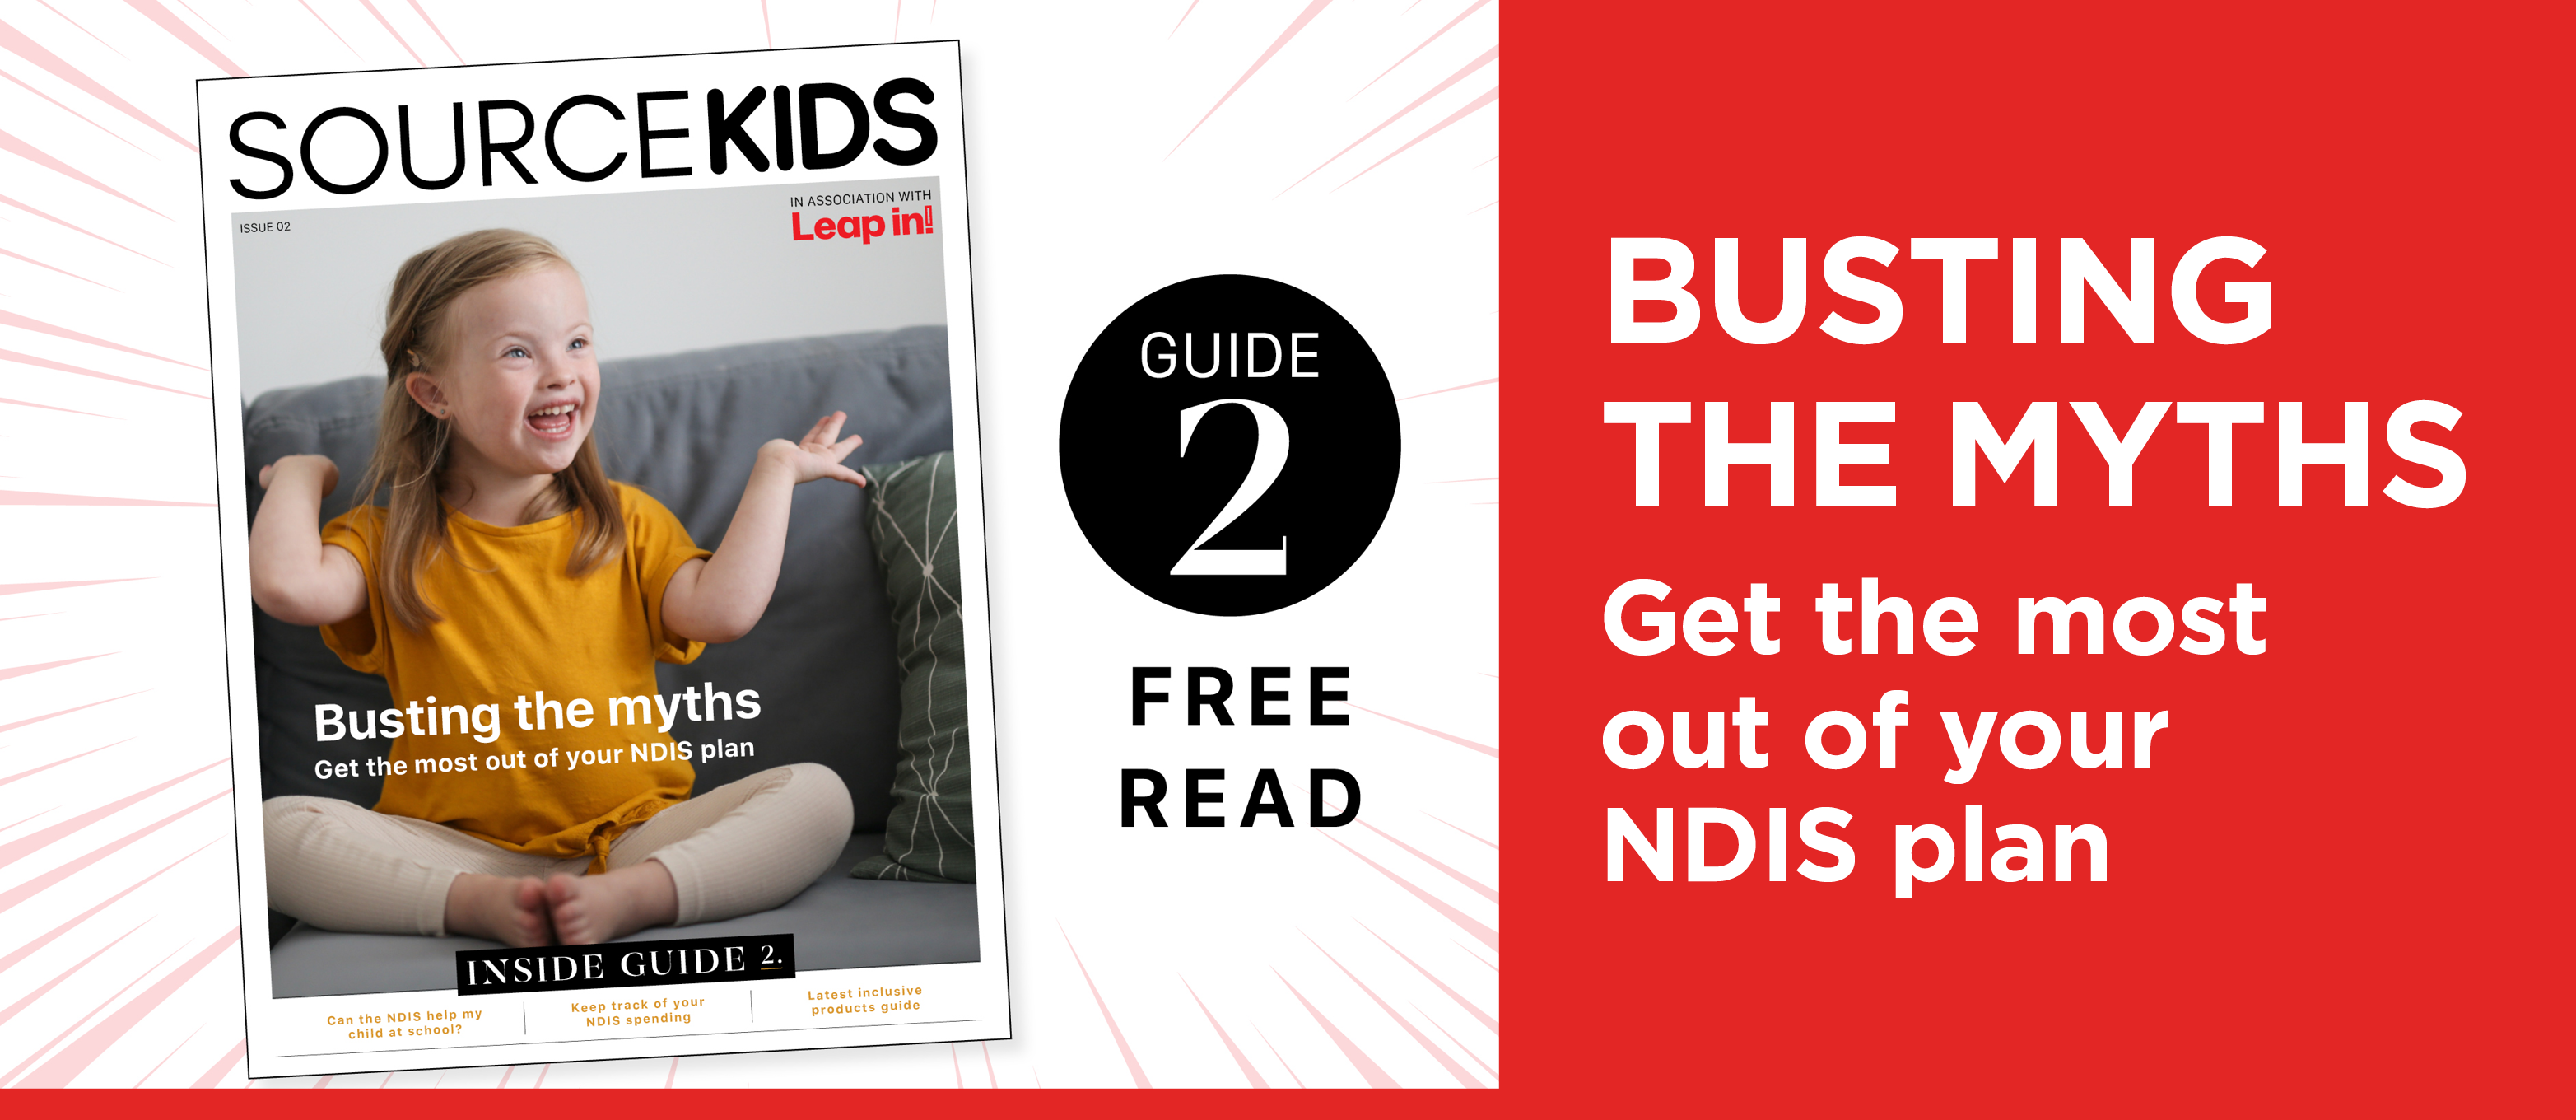 Busting the Myths – new Source Kids and Leap in! NDIS emagazine